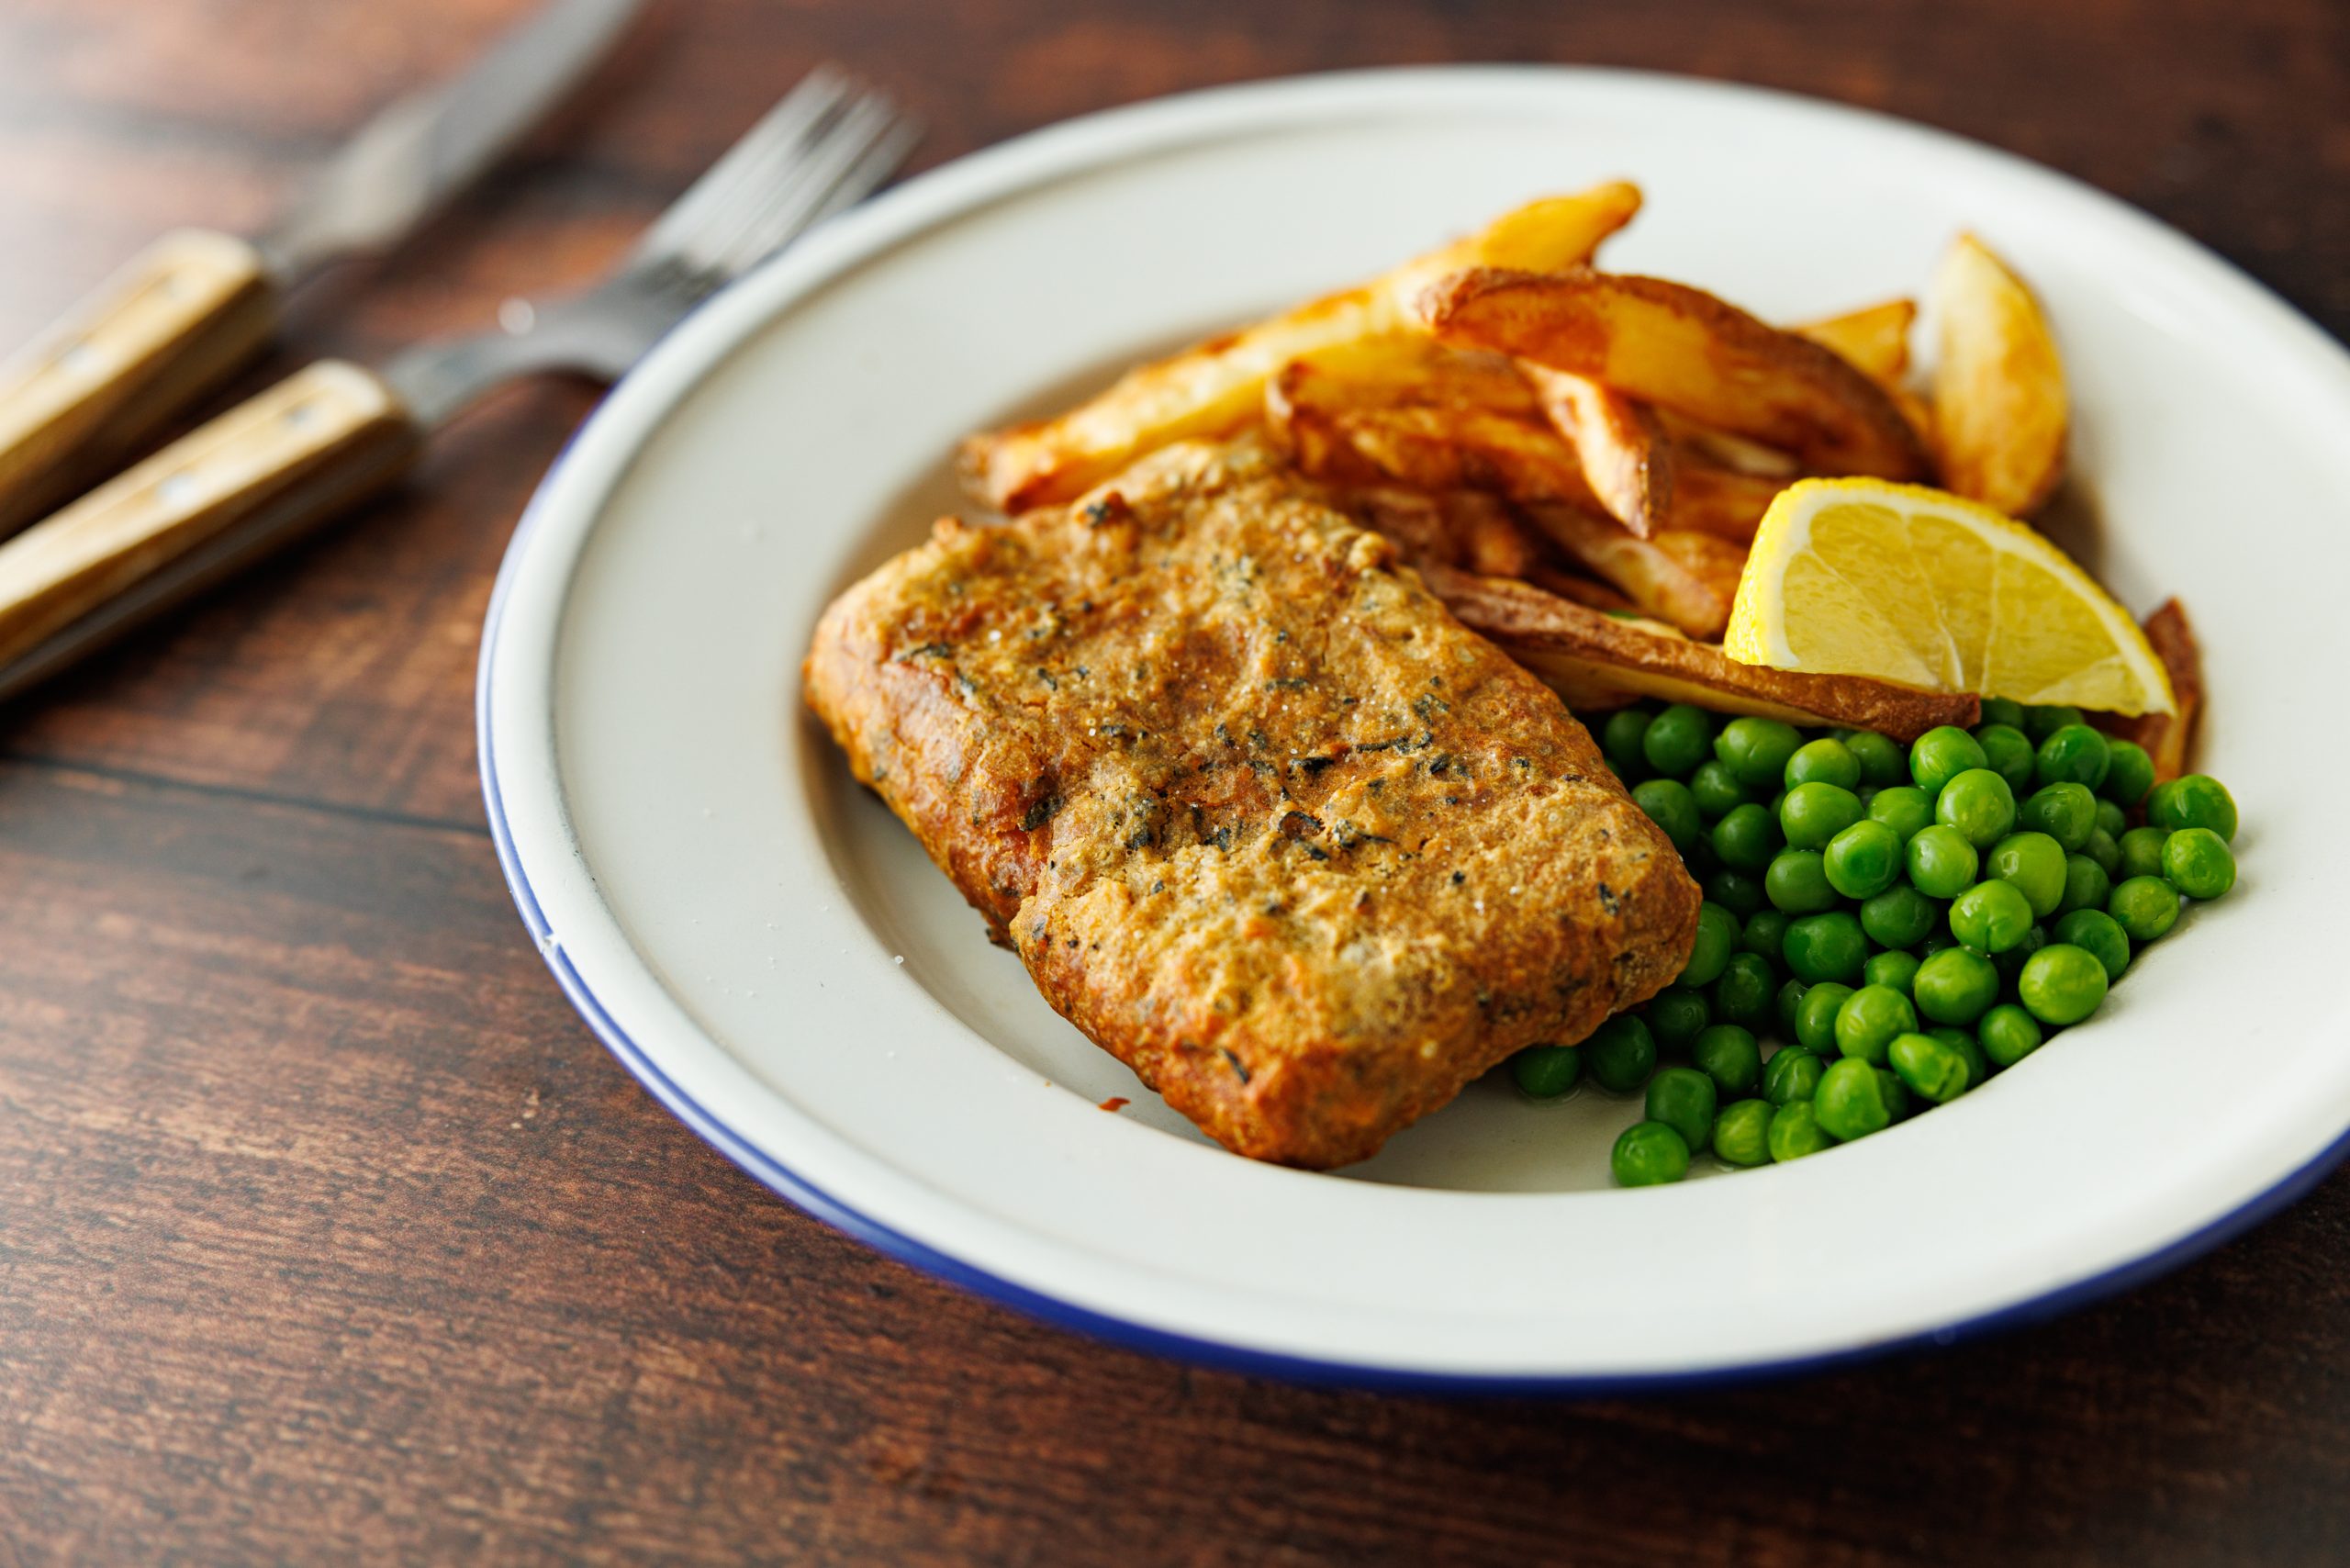 https://thehappypear.ie/wp-content/uploads/2023/05/fish-and-chips_8-scaled.jpg